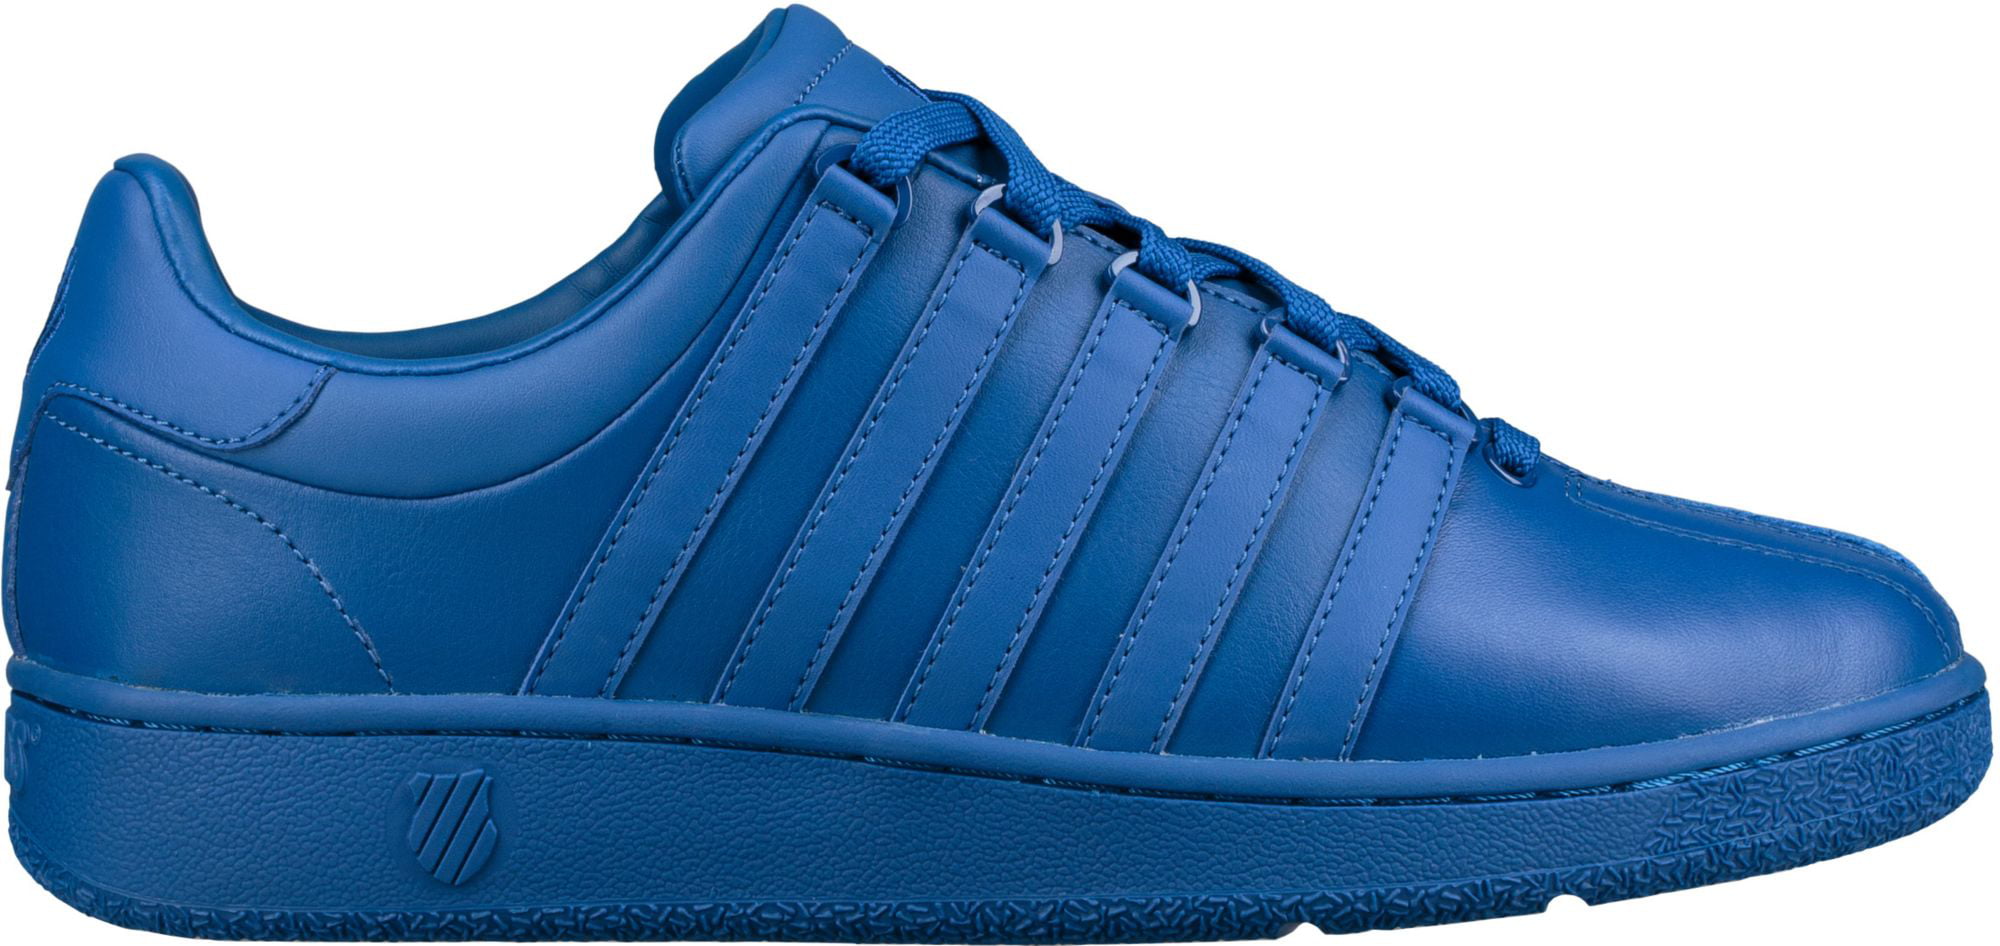 K Swiss Mens Classic Heritage Retro Vintage Casual Trainers From £19.99 